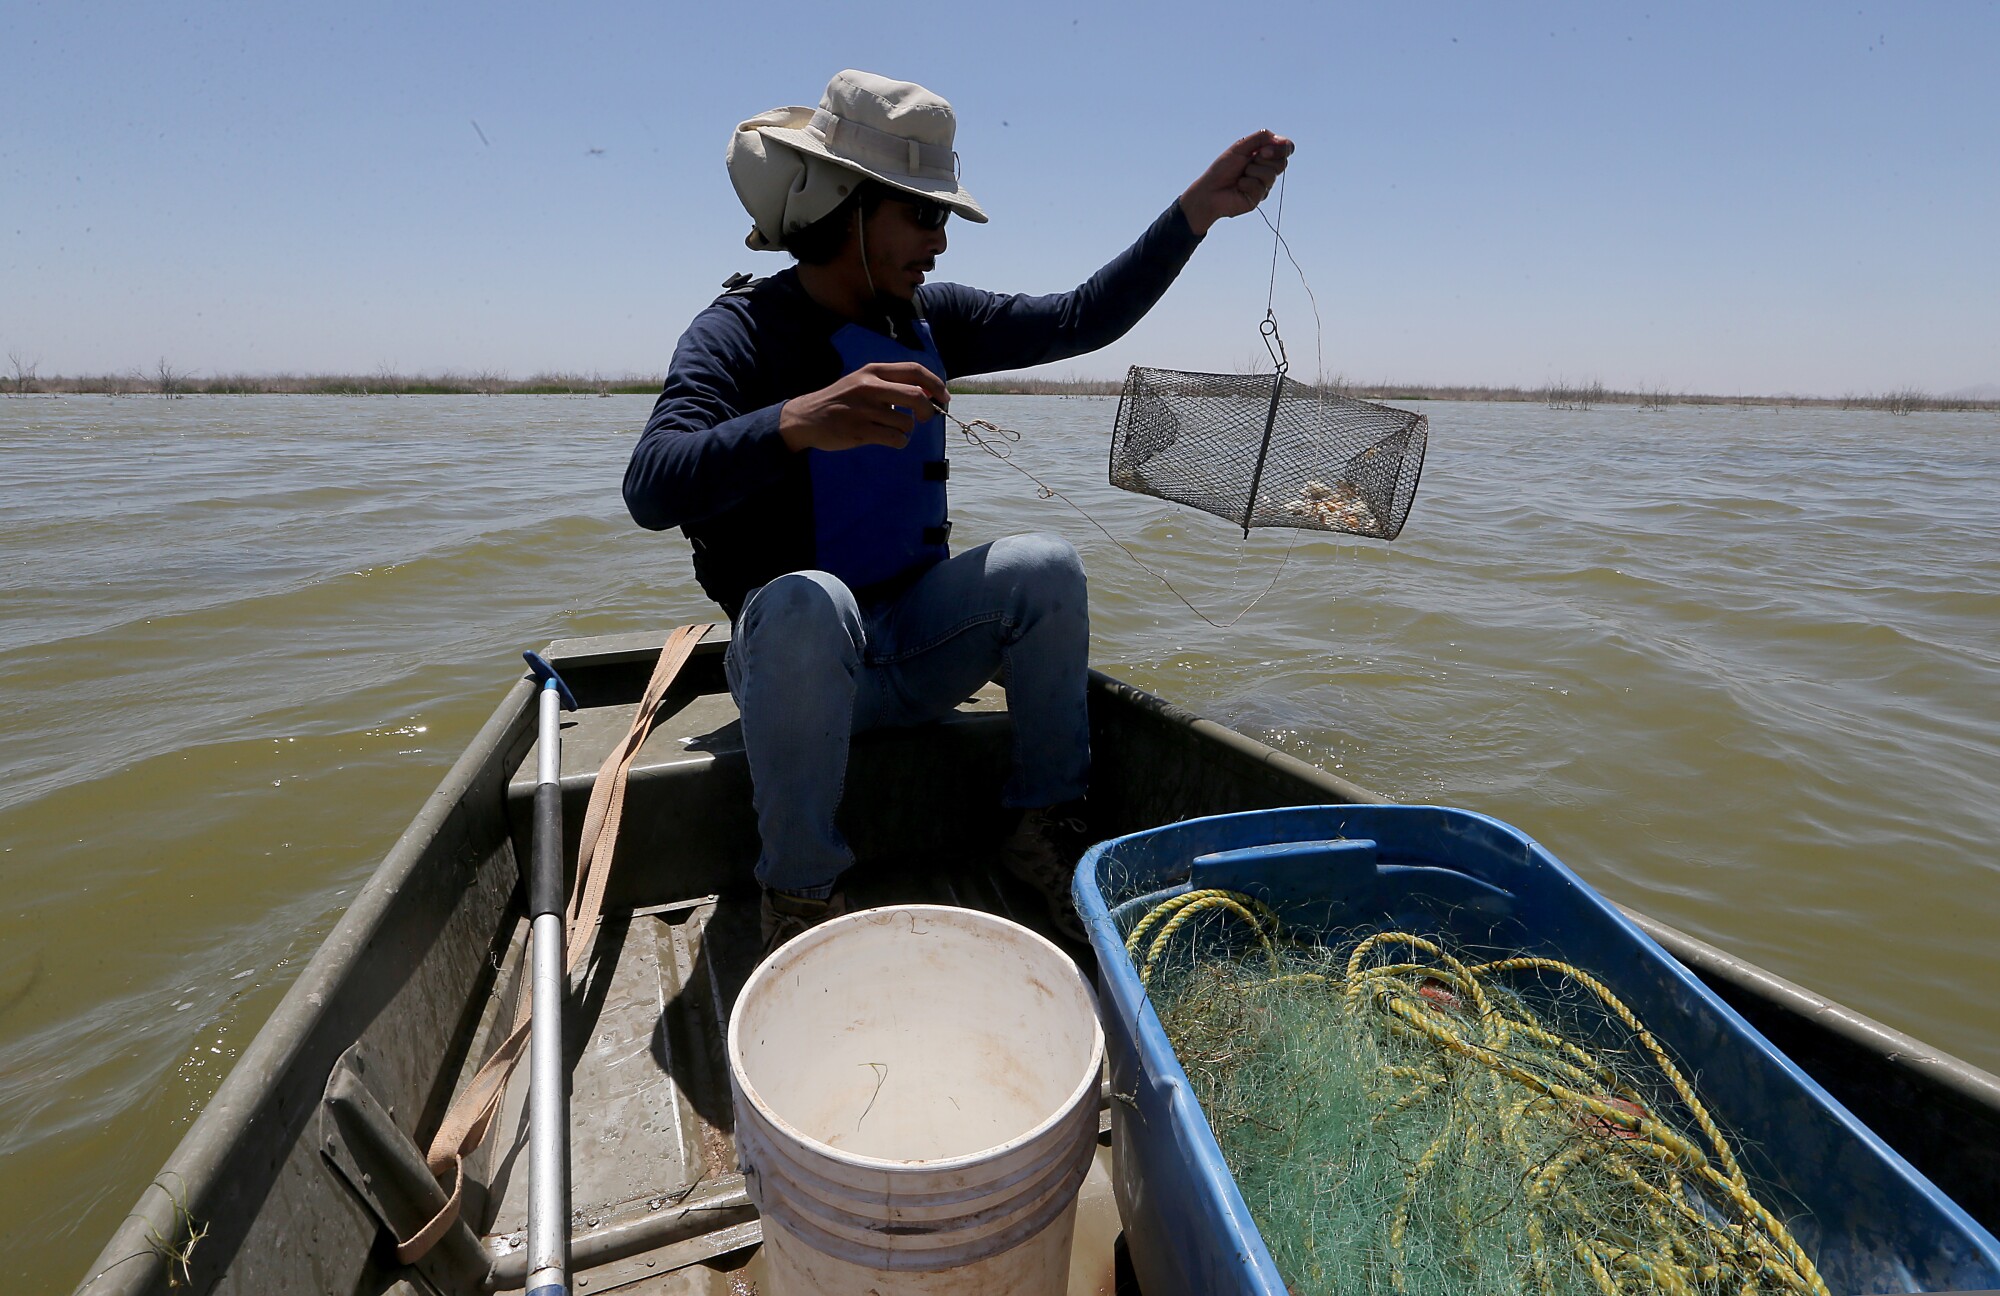 Conservationist Israel Mateo Sanchez Leyva collects fish during a survey at the mouth of the Colorado River.